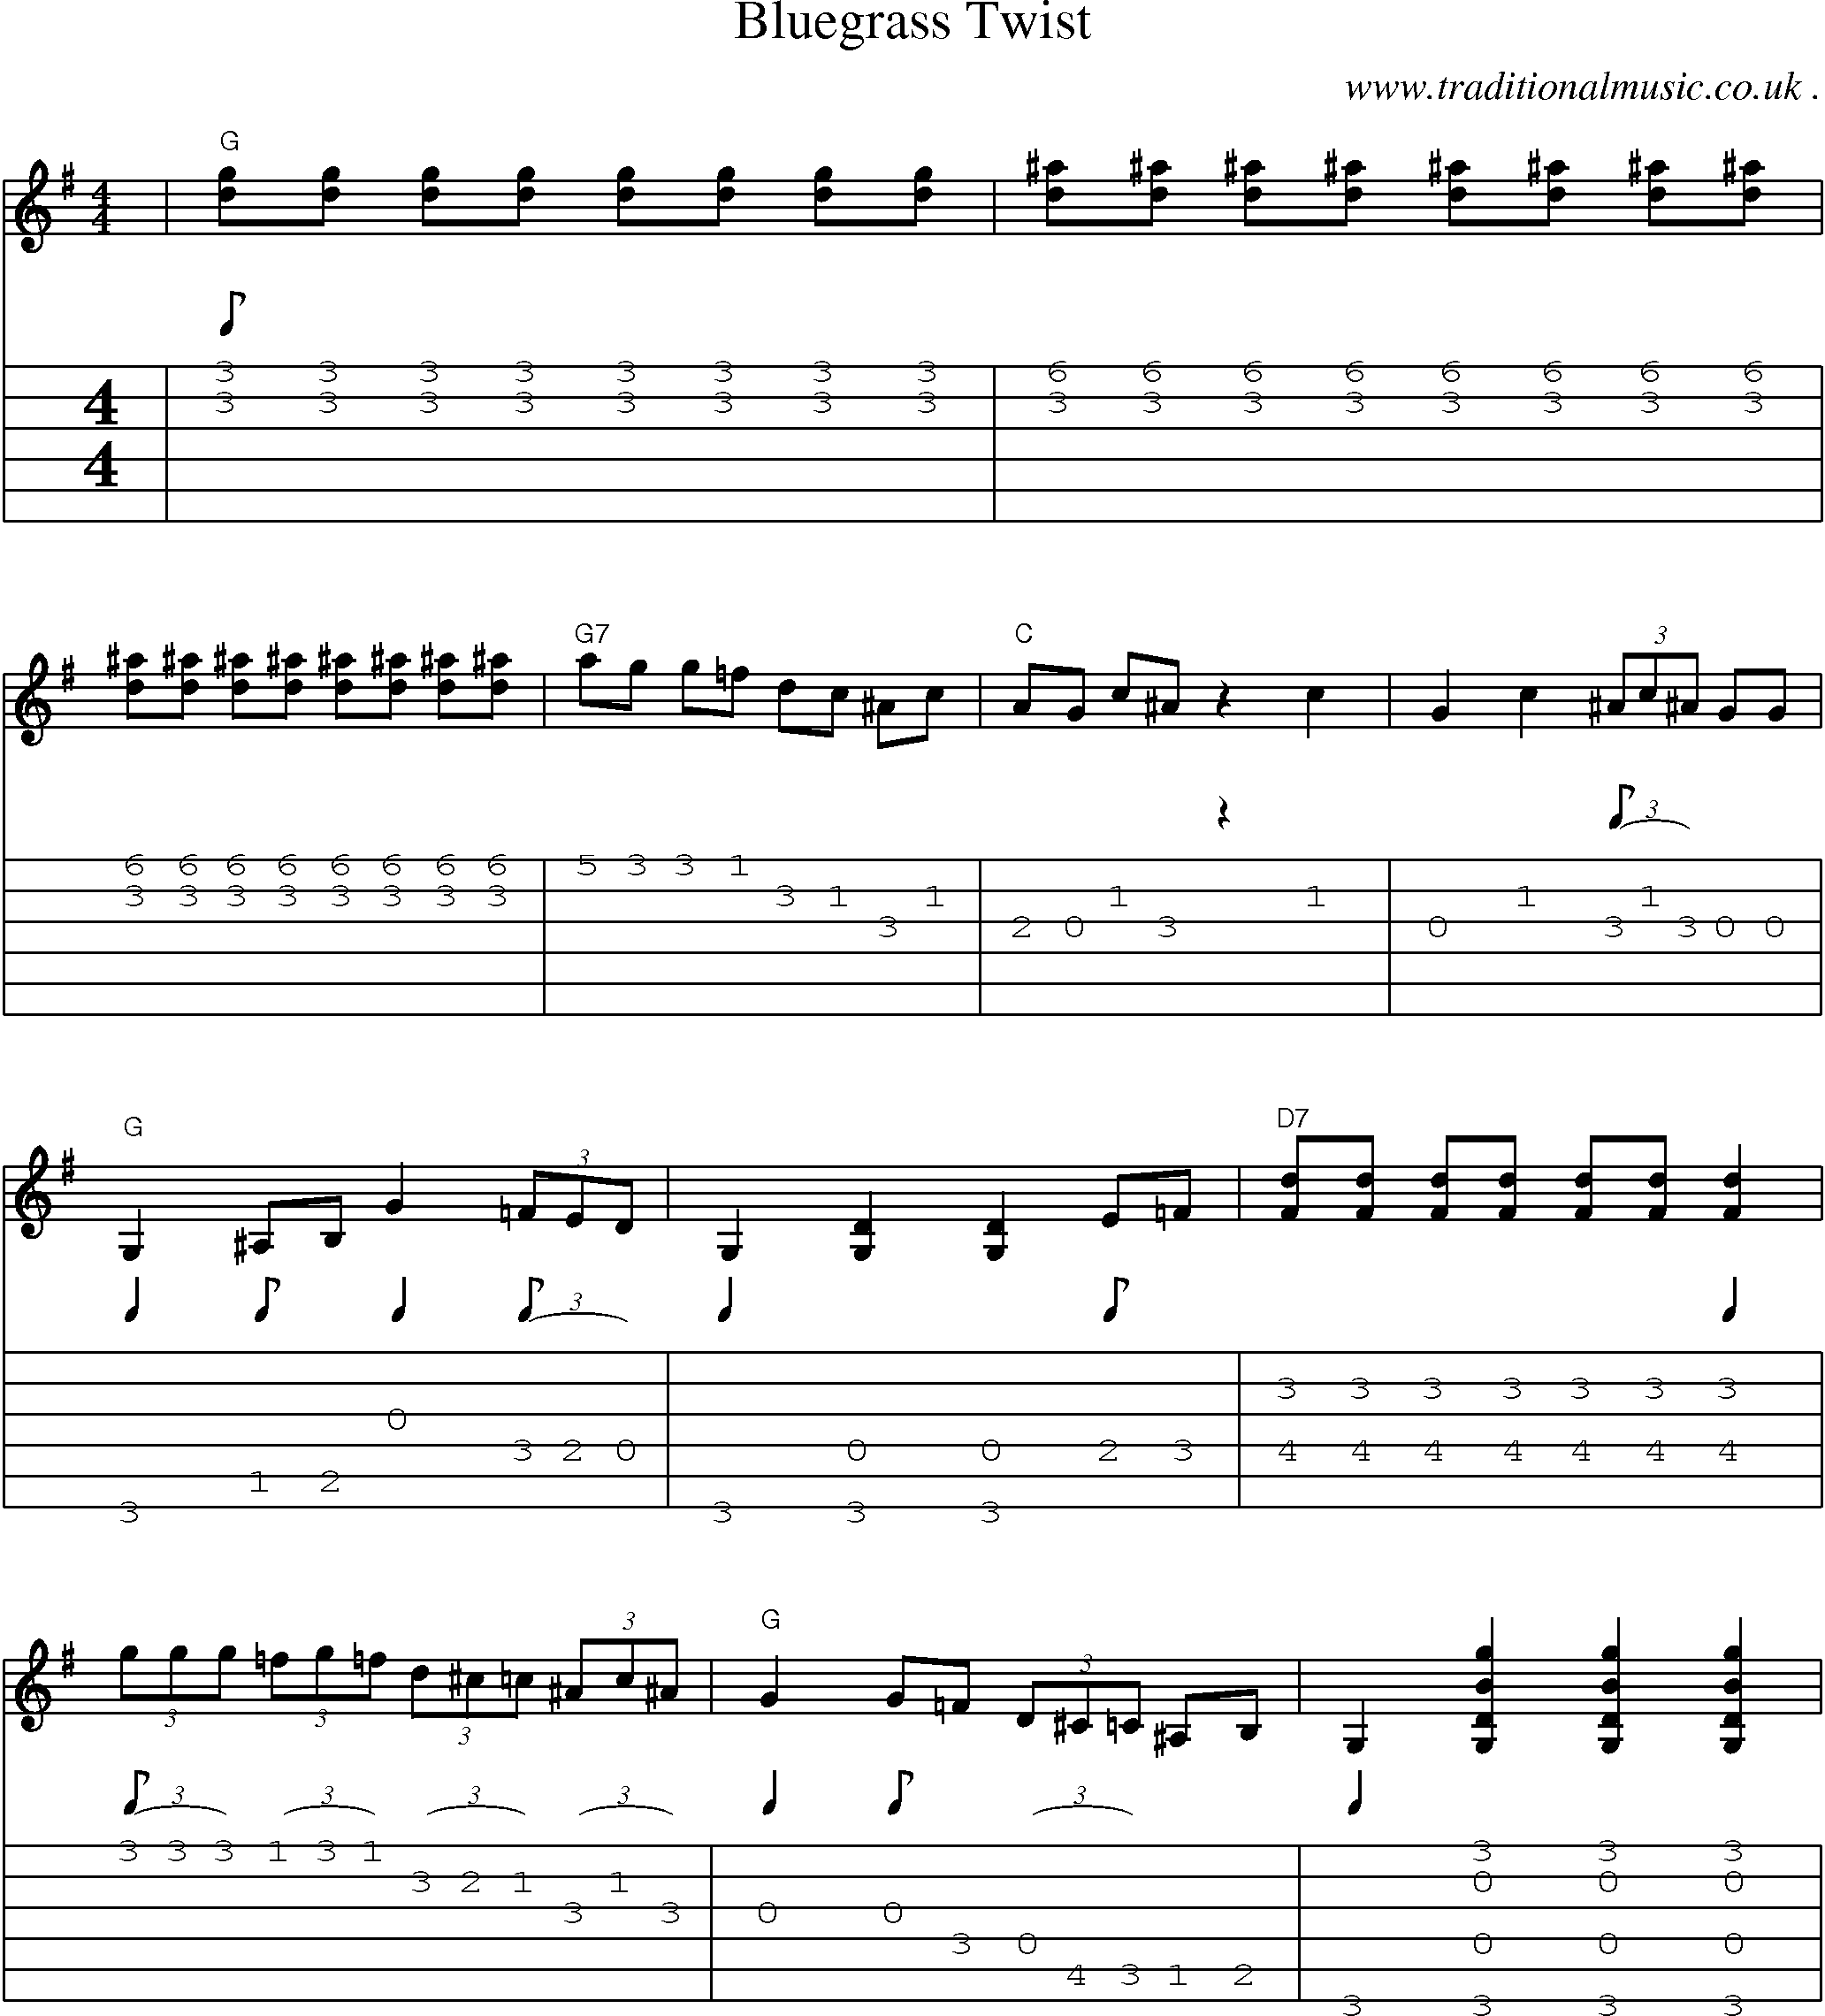 Music Score and Guitar Tabs for Bluegrass Twist